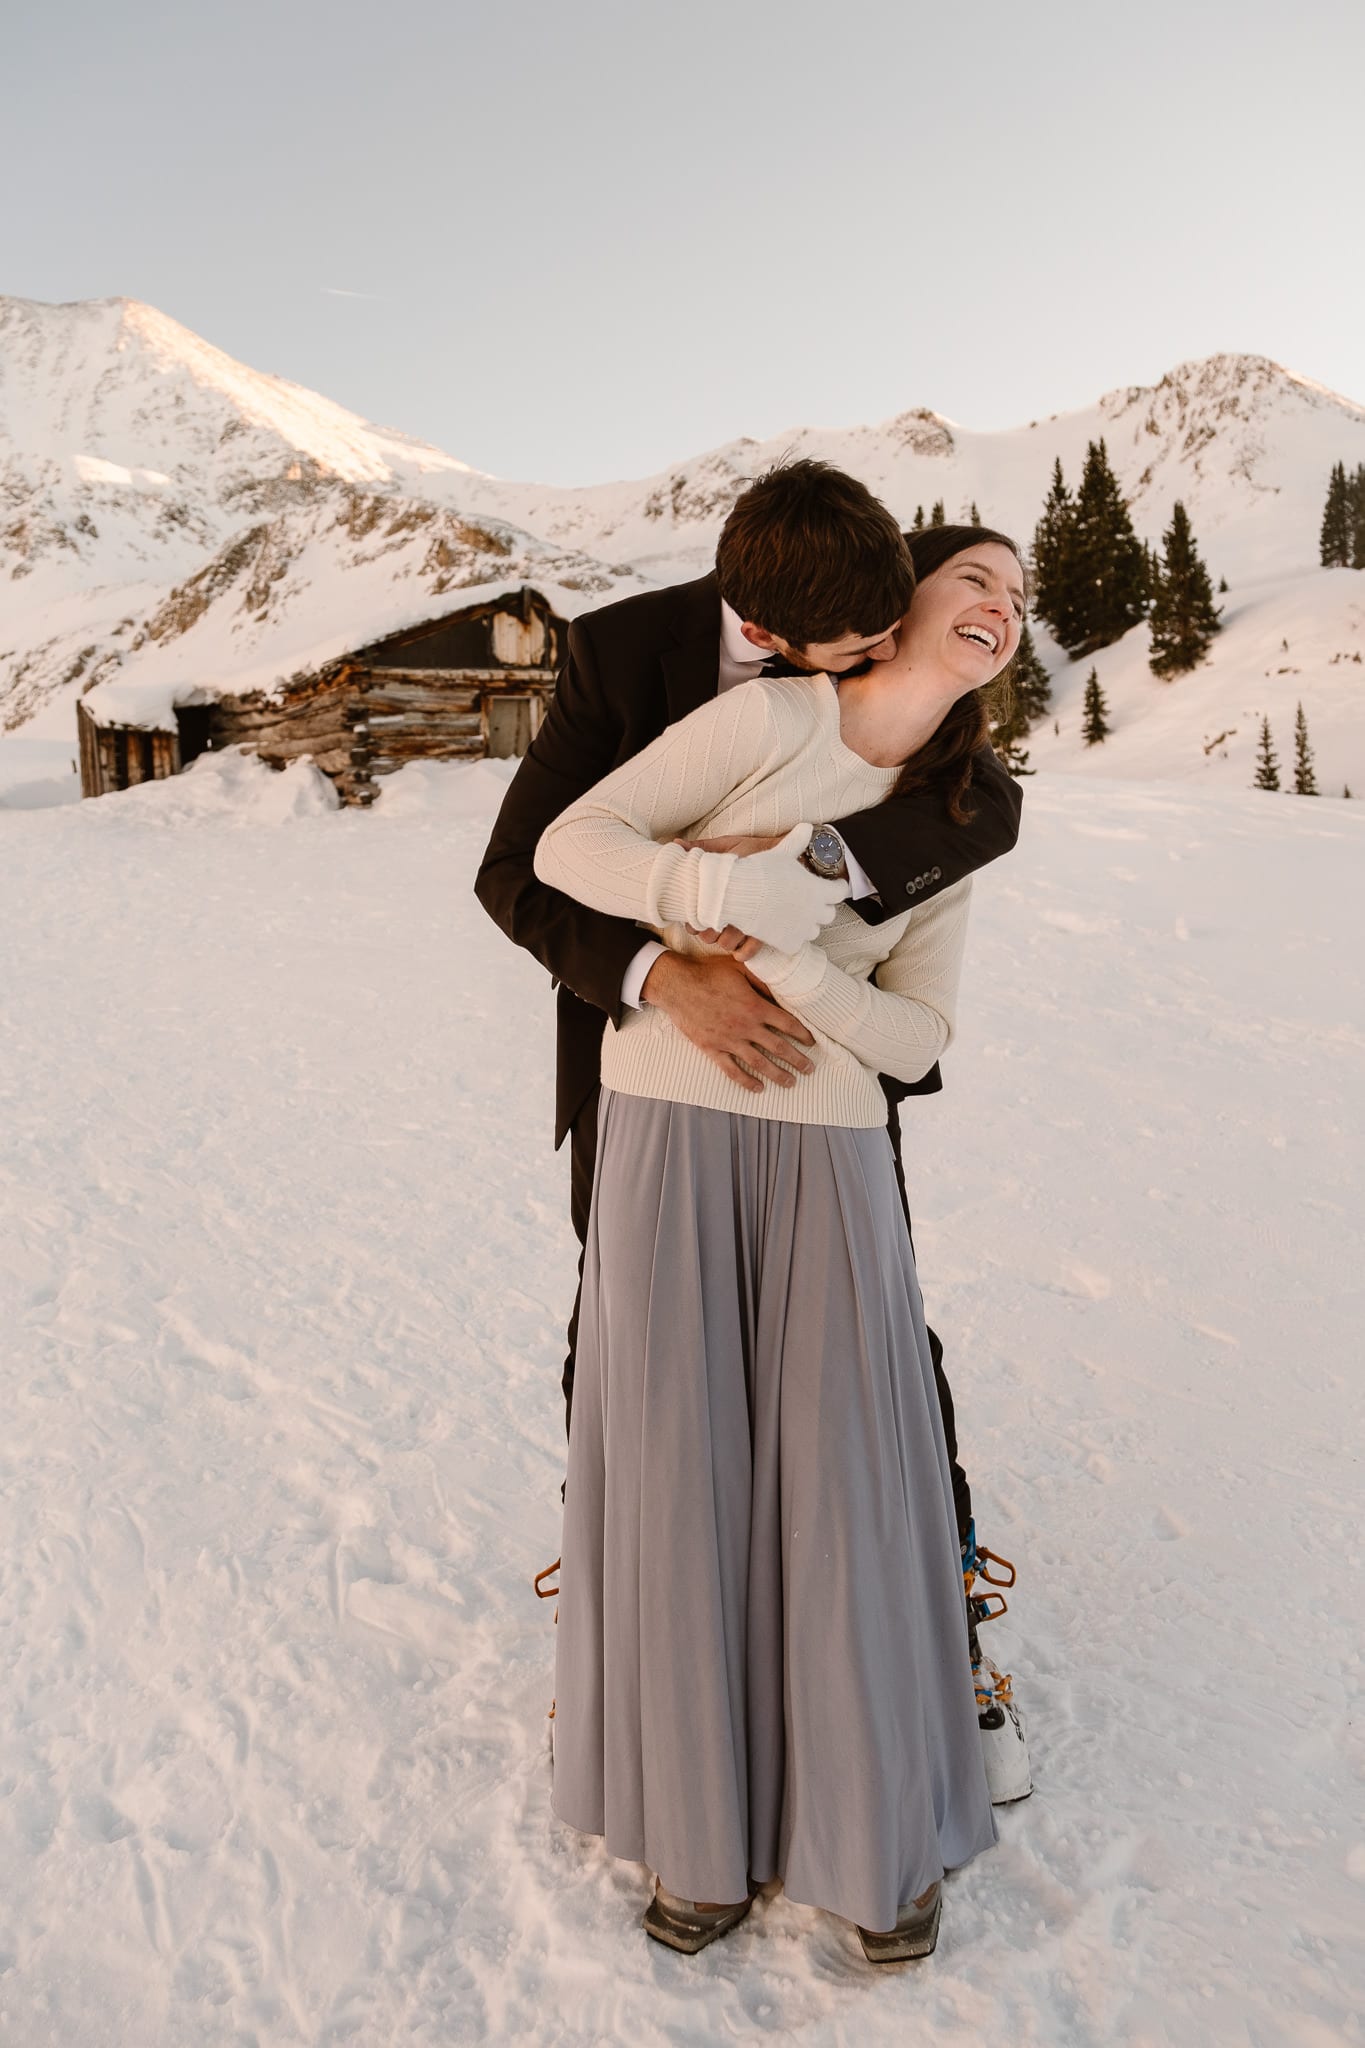 Bride and groom snuggle up close to stay warm at winter wedding, backcountry skiing elopement in Colorado, Colorado wedding photographer